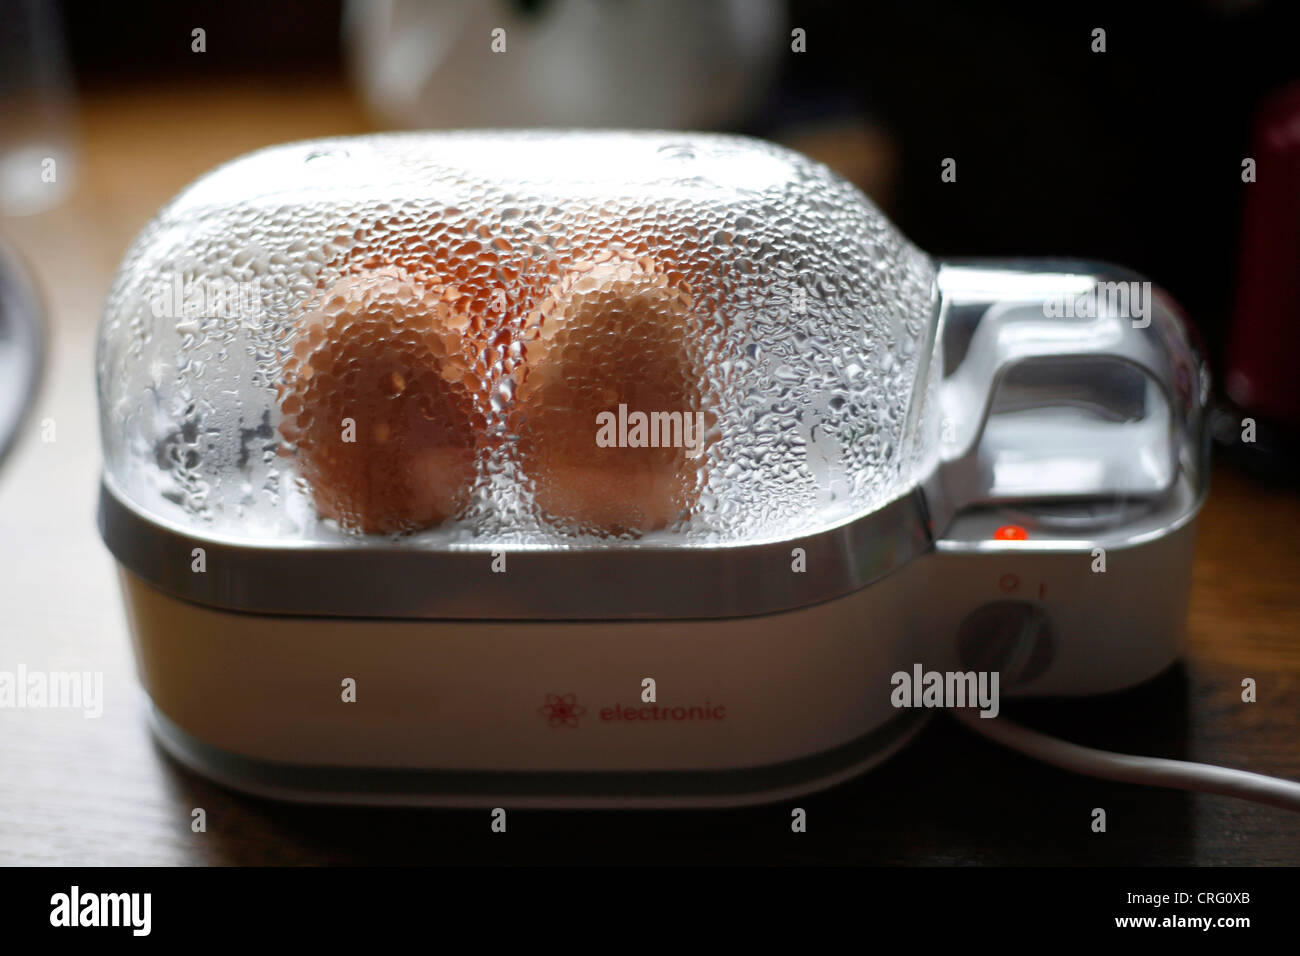 16,900+ Egg Cooker Stock Photos, Pictures & Royalty-Free Images